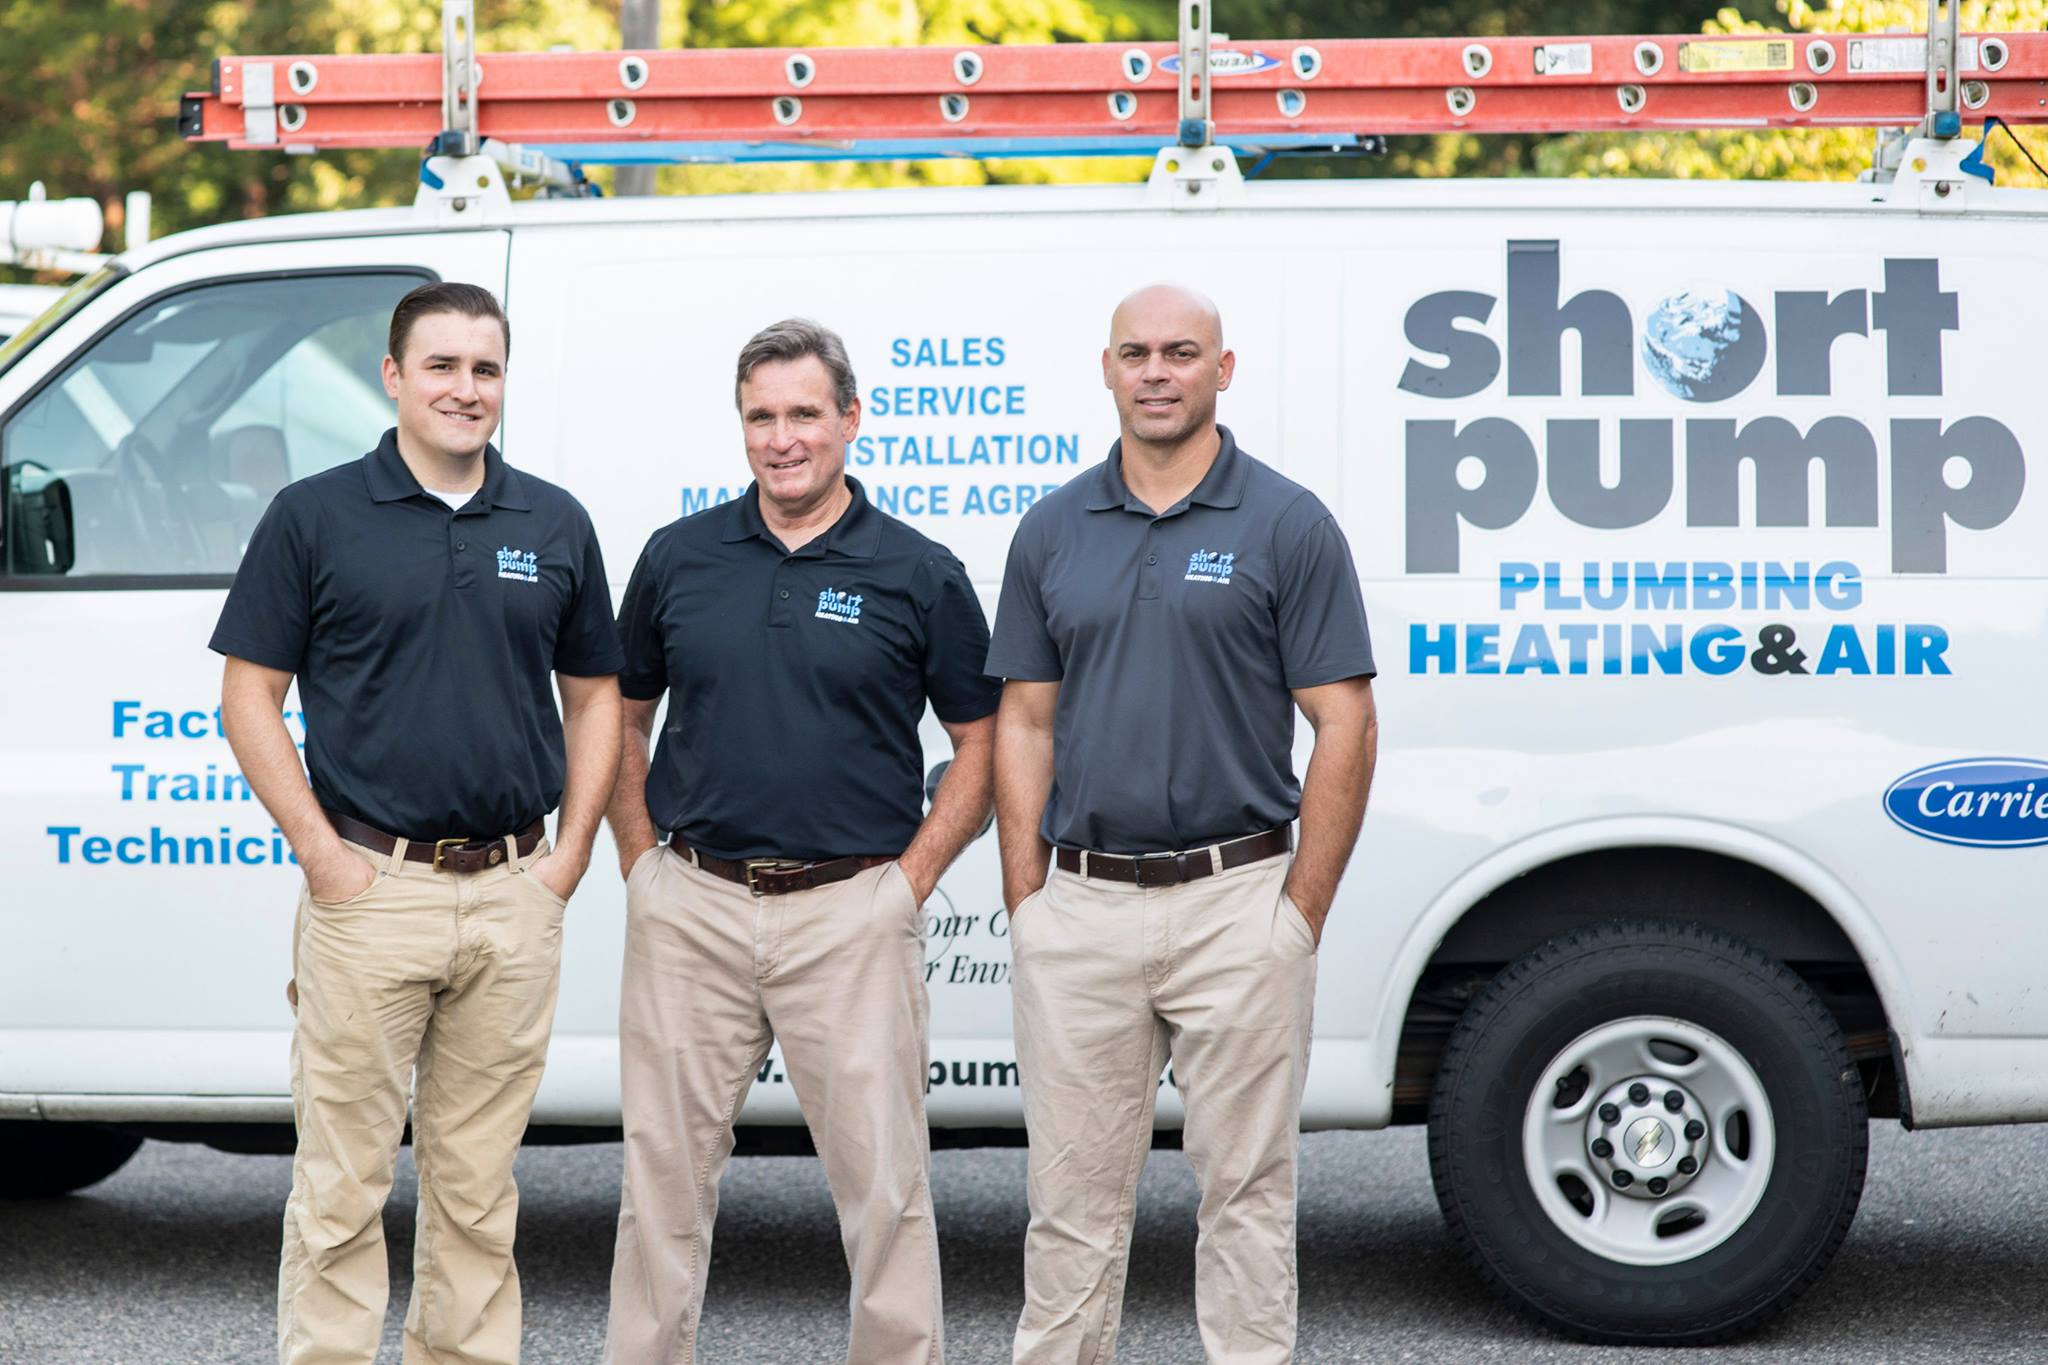 F.H. Furr employees standing in front of truck